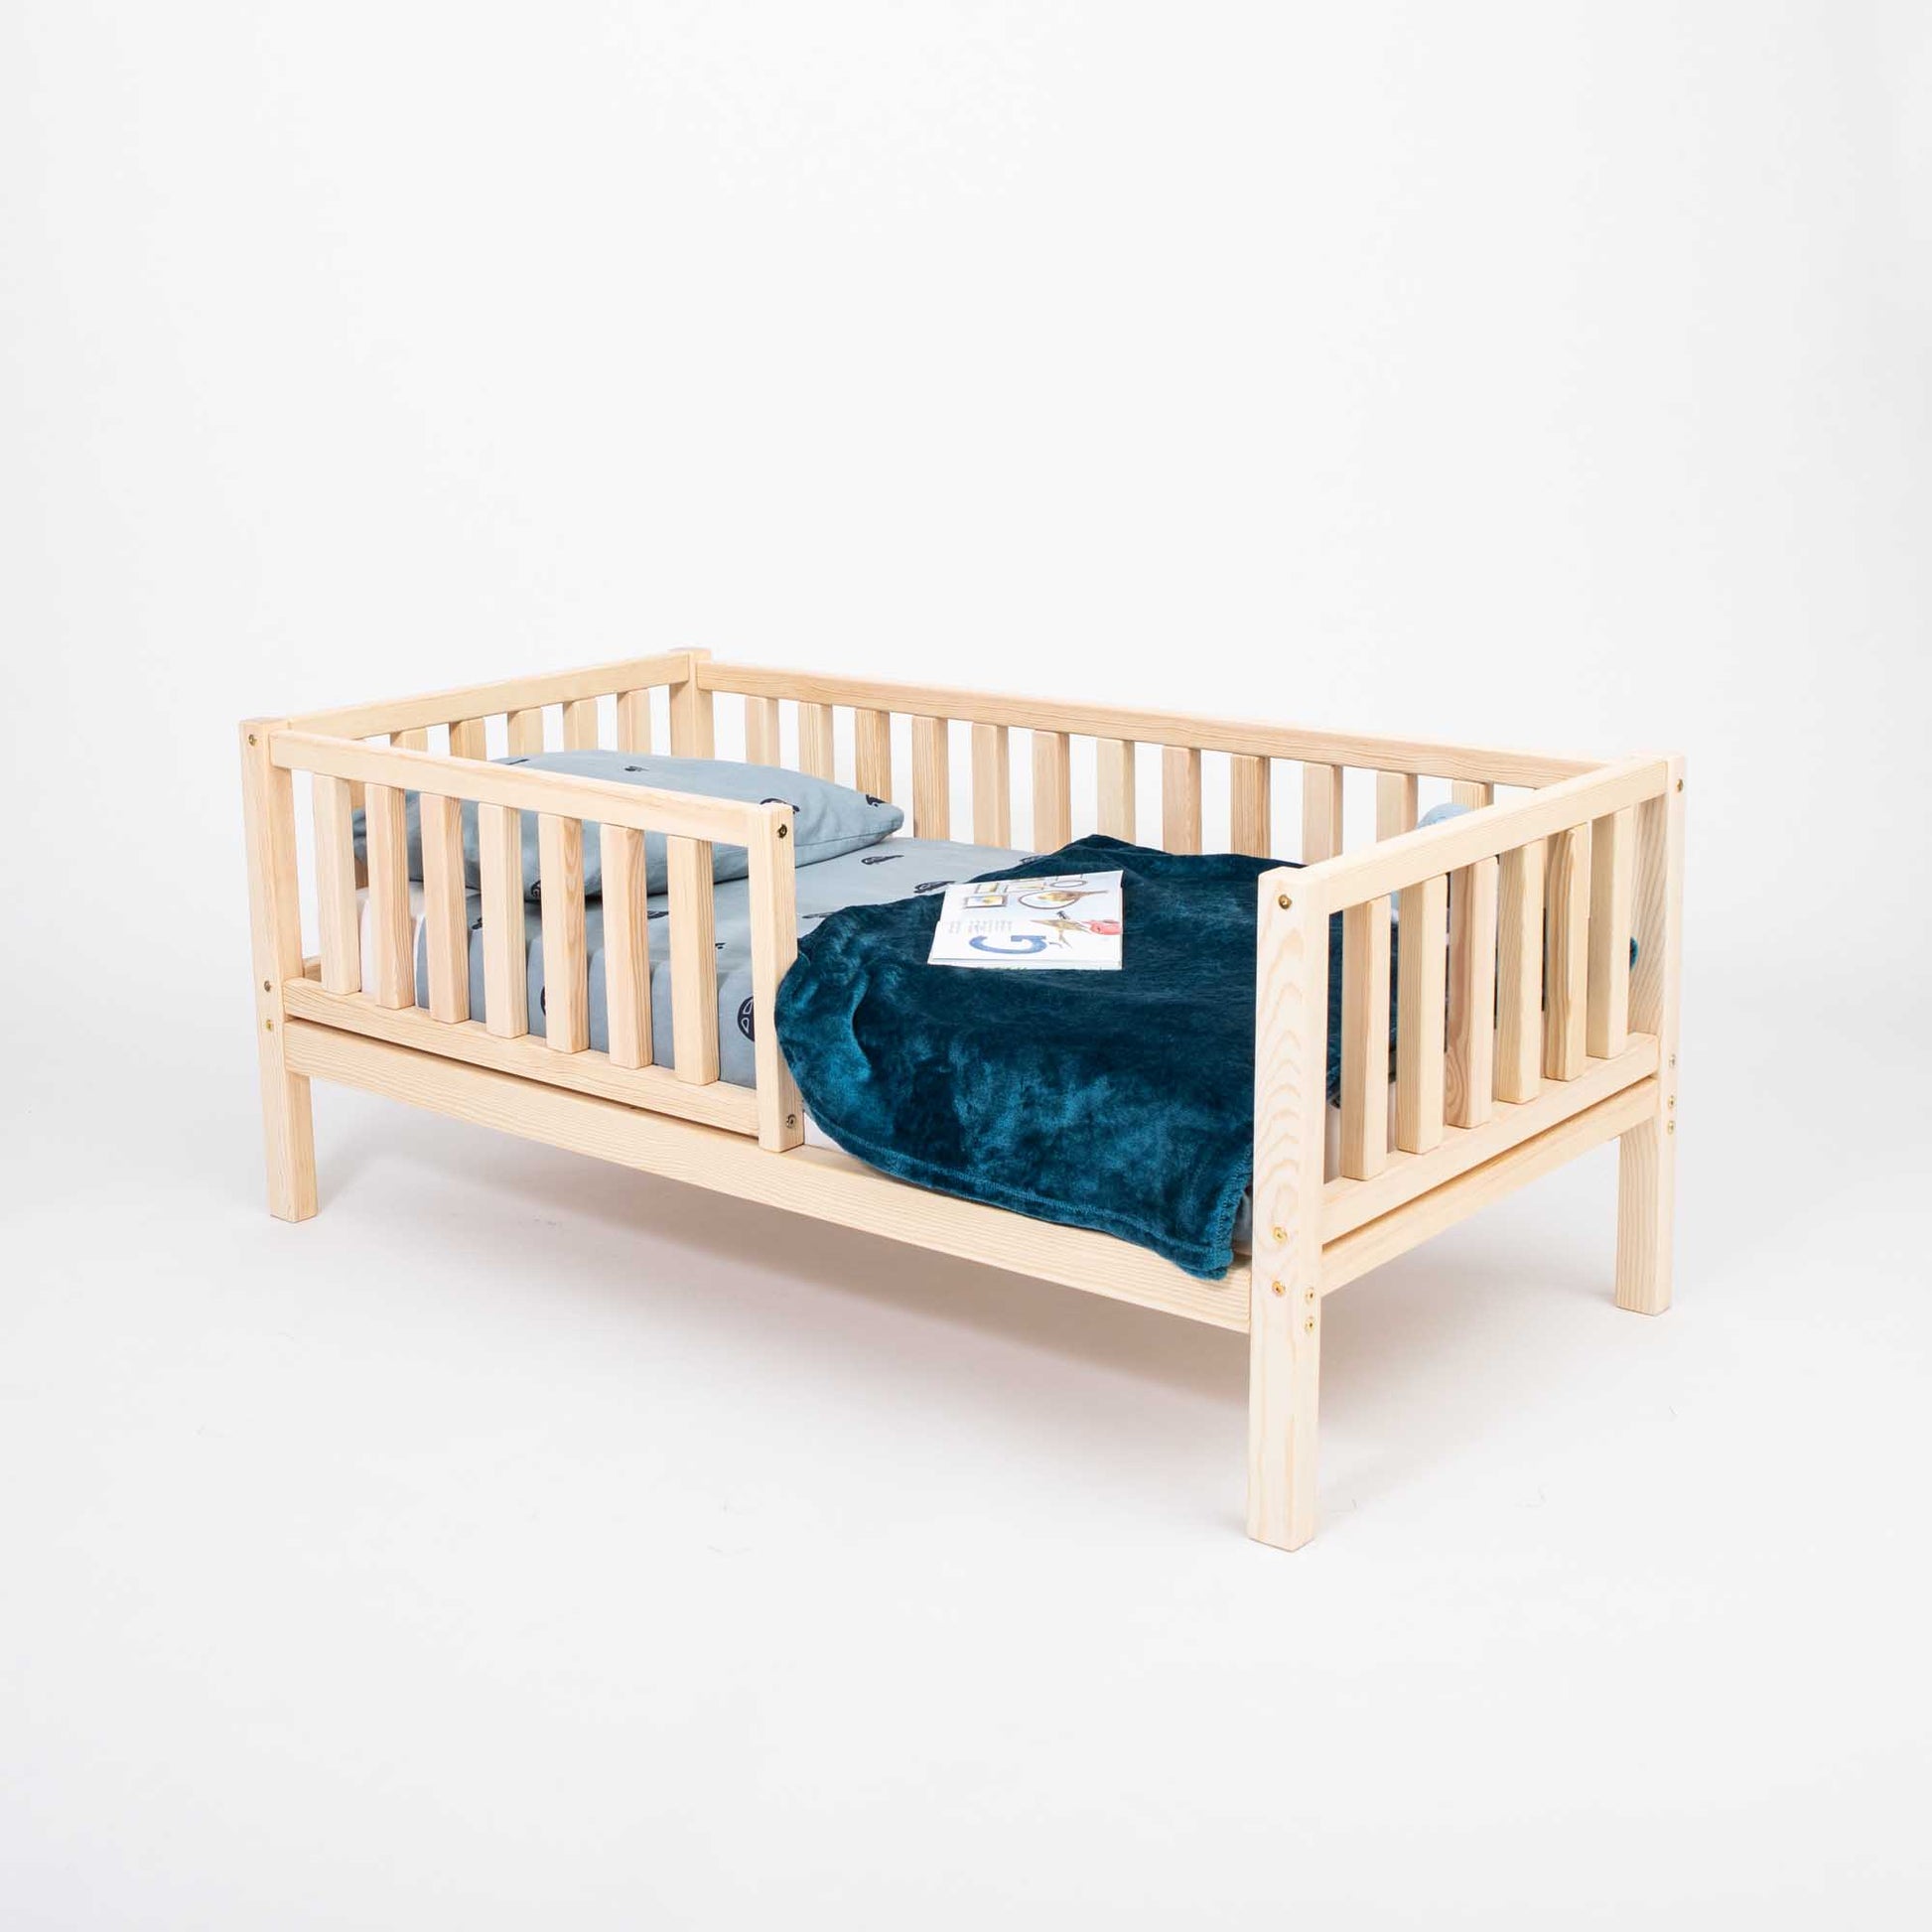 A Sweet Home From Wood 2-in-1 toddler bed on legs with a vertical rail fence, featuring a blue blanket.